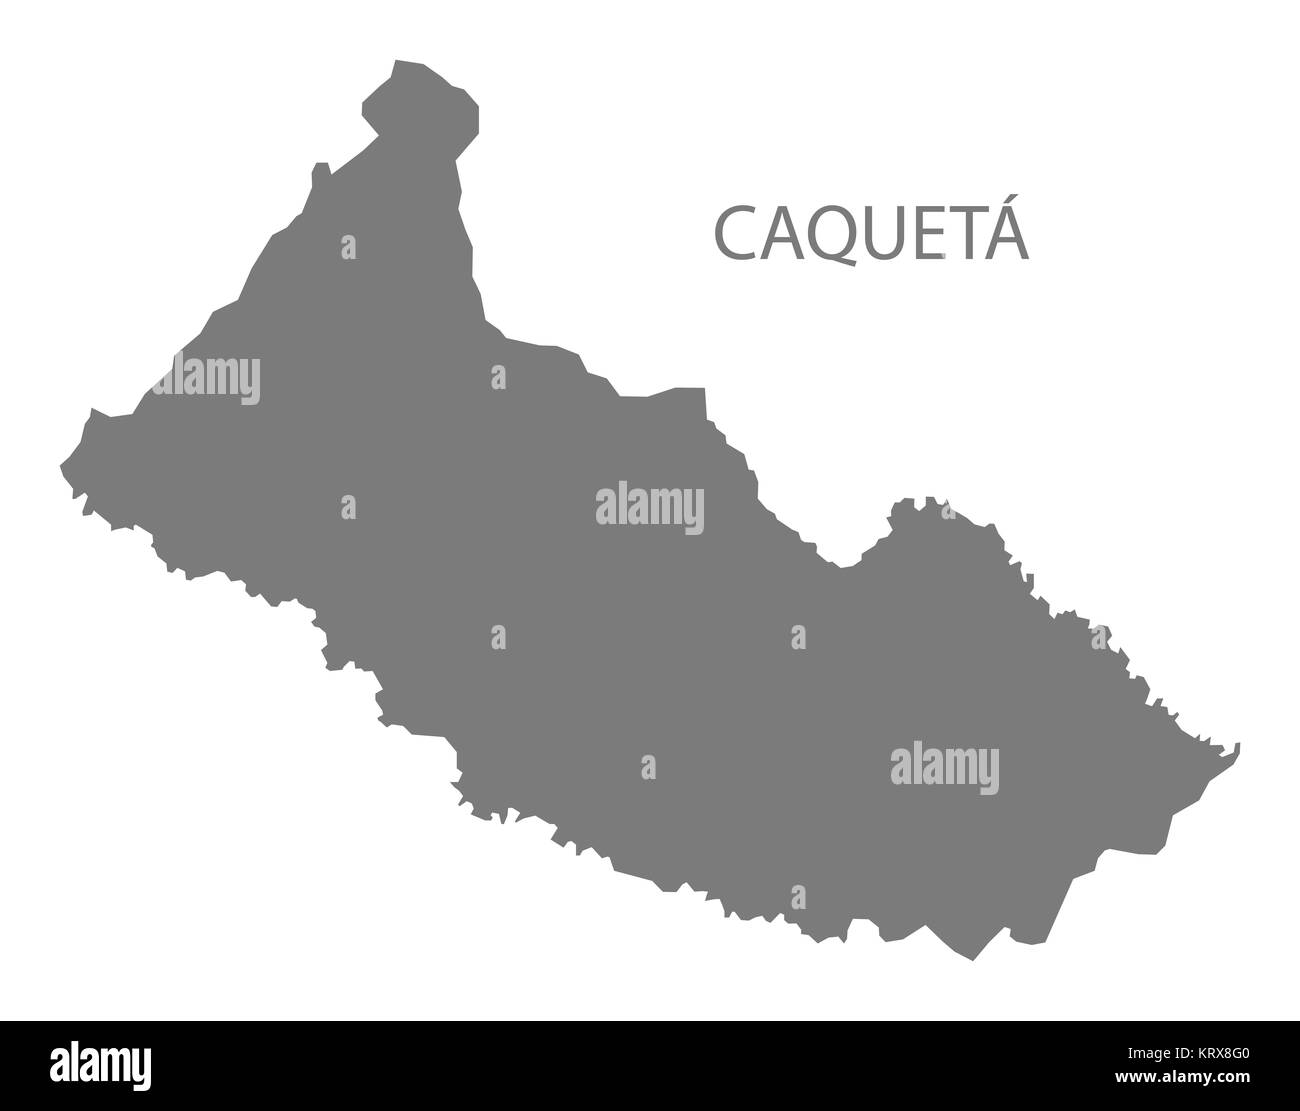 Caqueta Colombia Map in grey Stock Photo